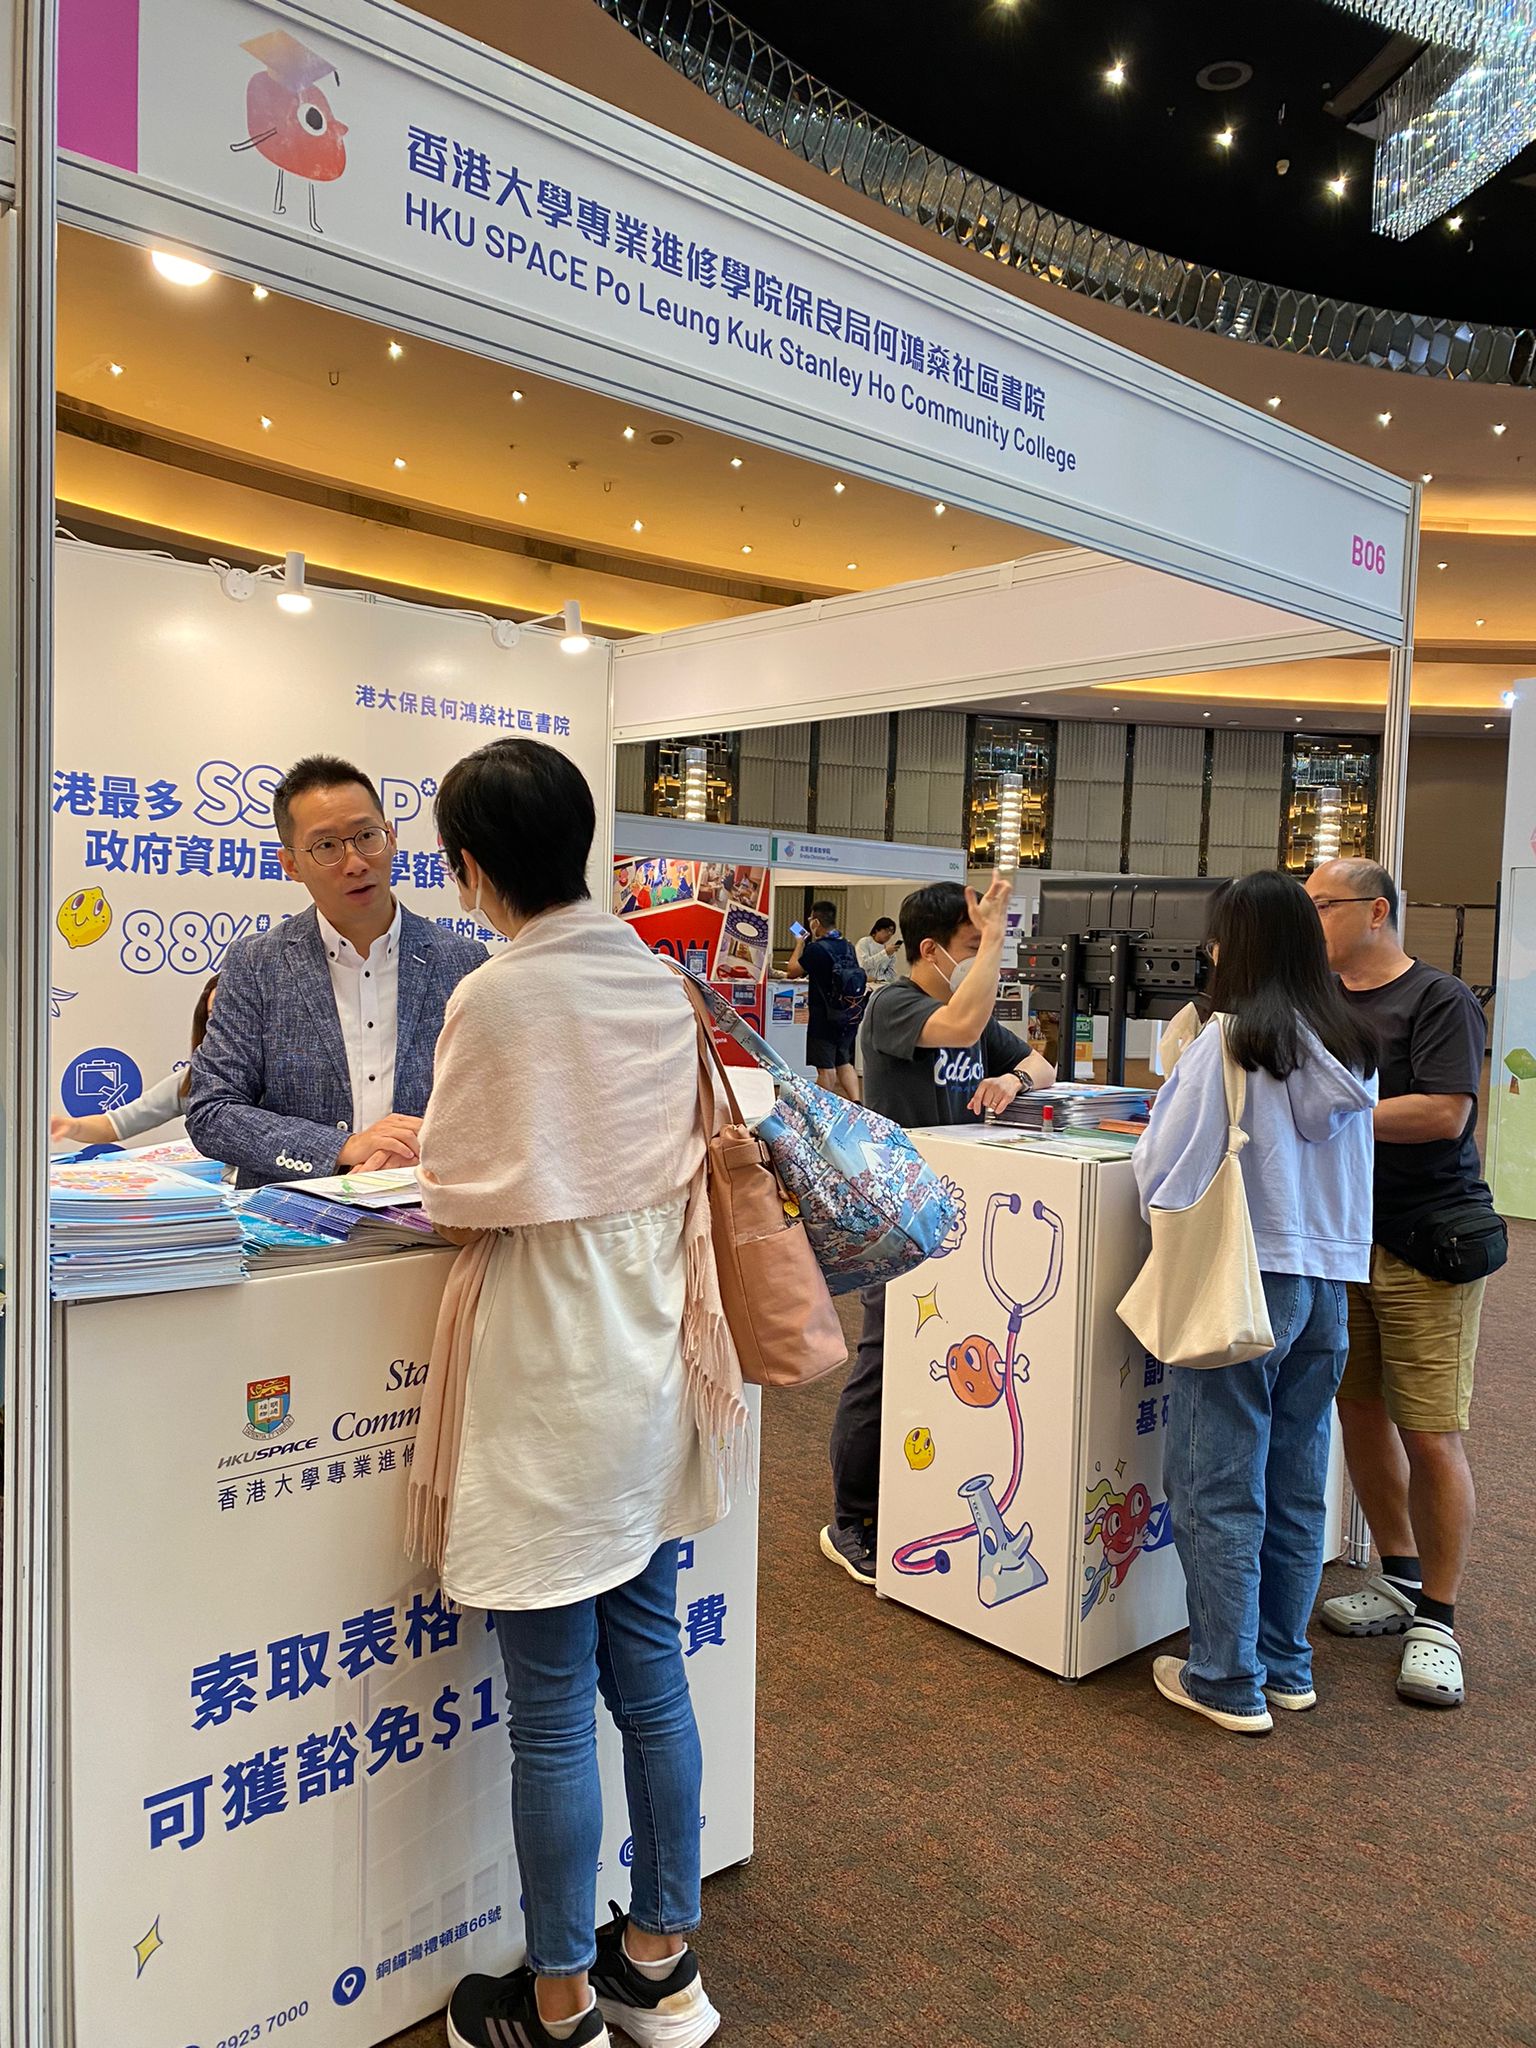 HPSHCC College Lecturers actively engaged with numerous current HKDSE students and their parents, offering insights into our Associate Degree and Higher Diploma programmes.